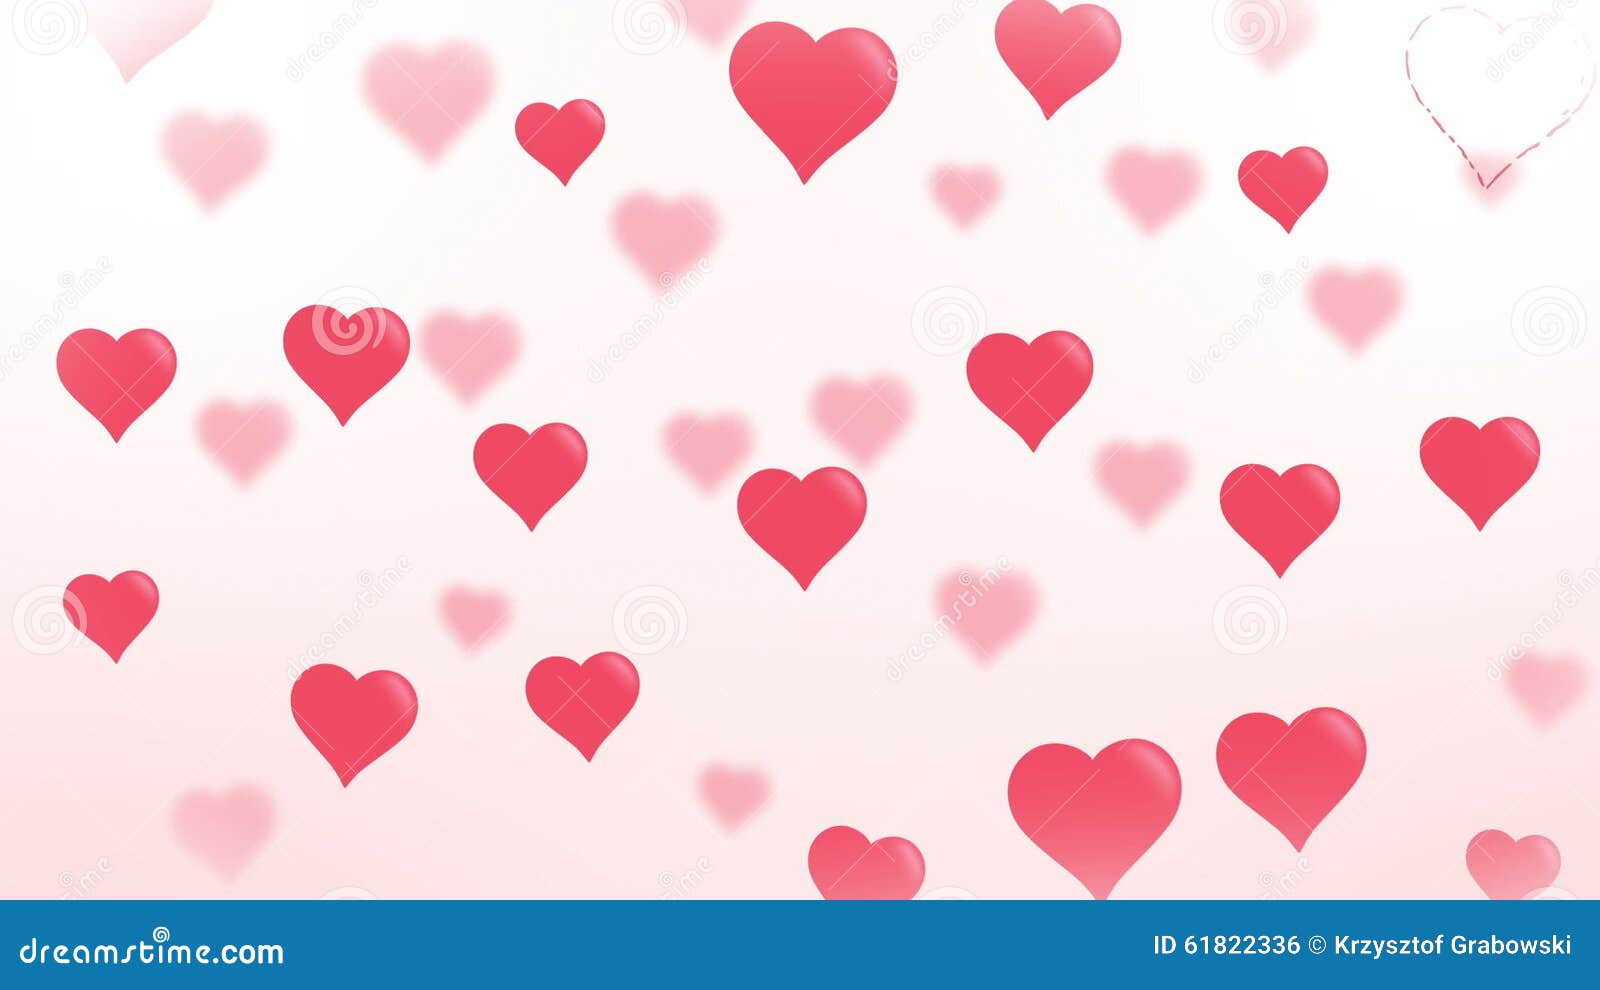 Hearts Loop / Smooth Cartoon Background Stock Footage - Video of love,  hearts: 61822336